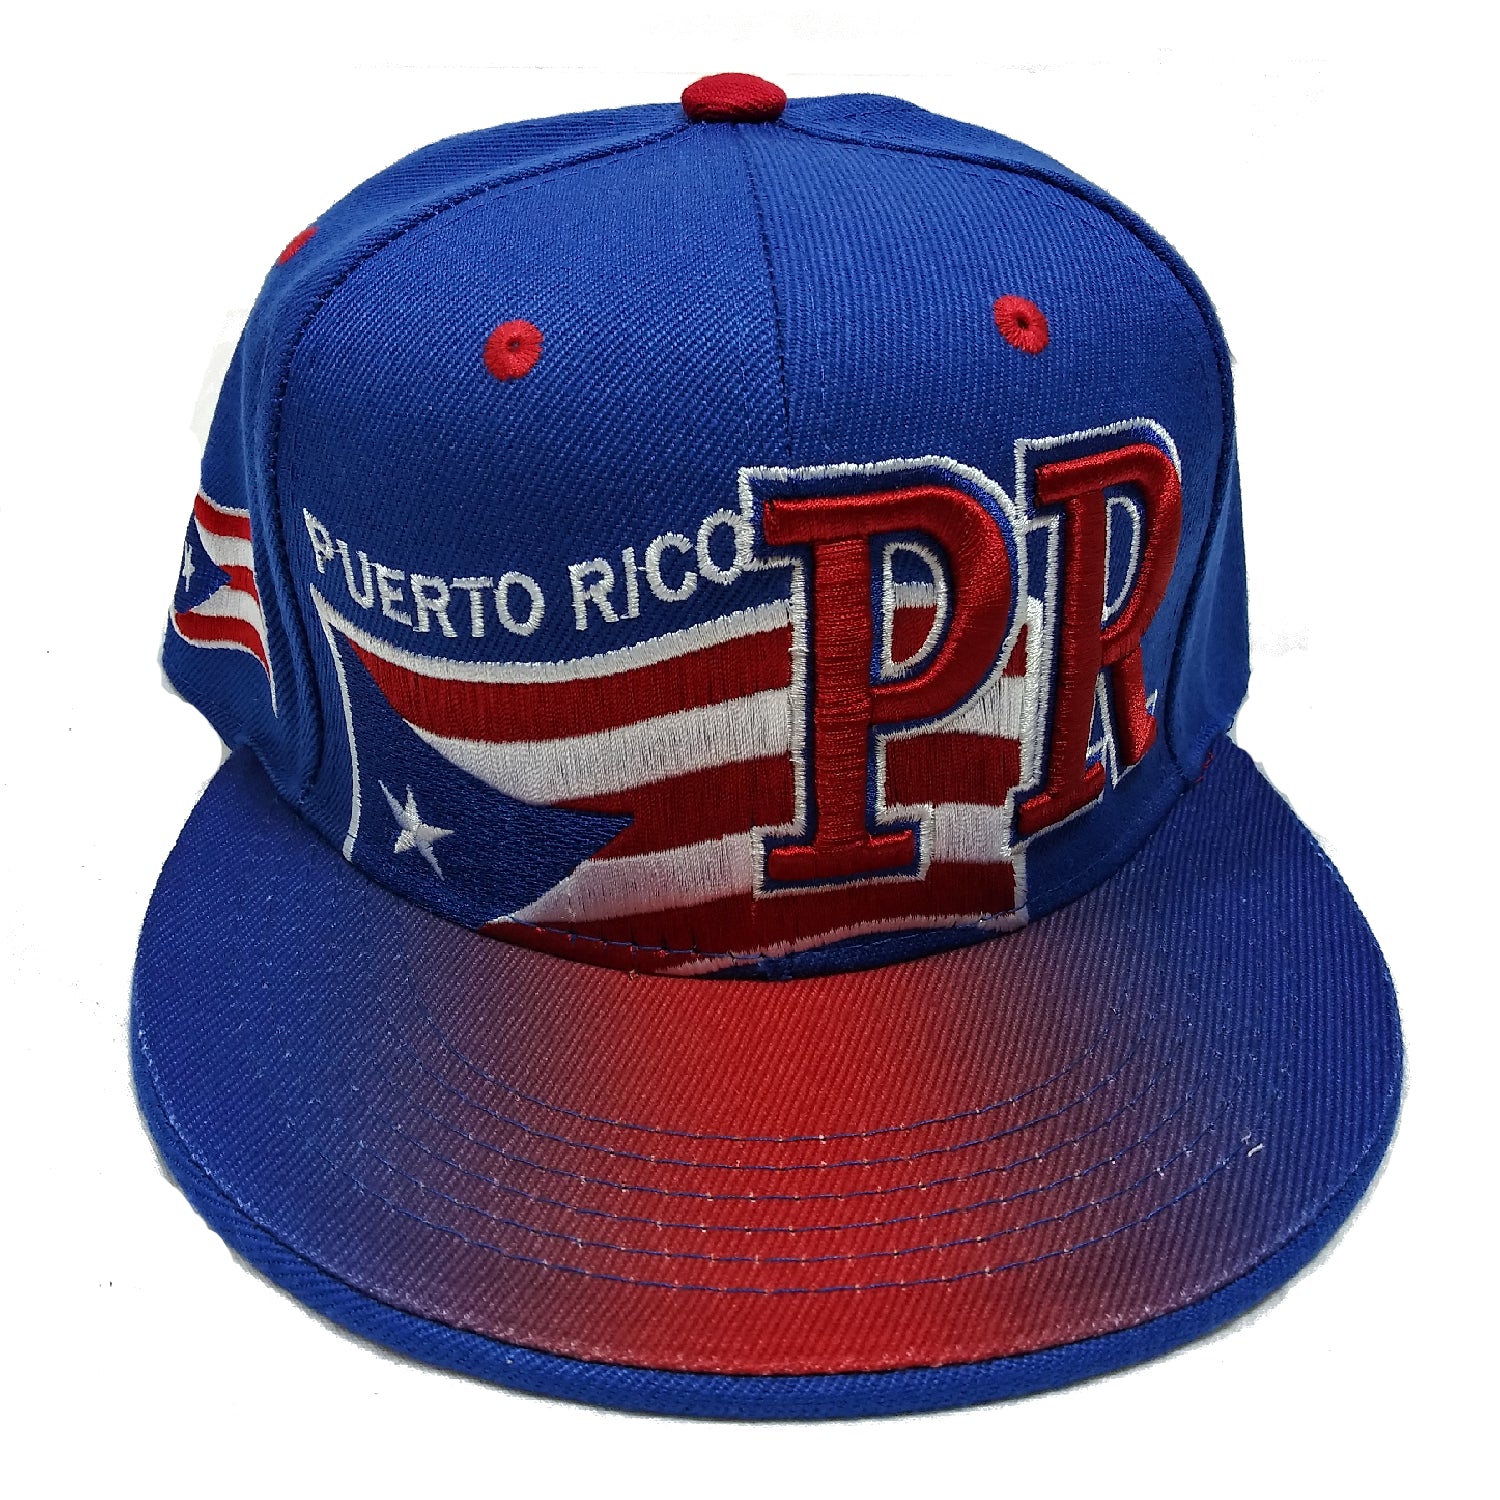 Retro Costa Rica Palm Tree casquette Red One Size Adjustable Snapback Hat